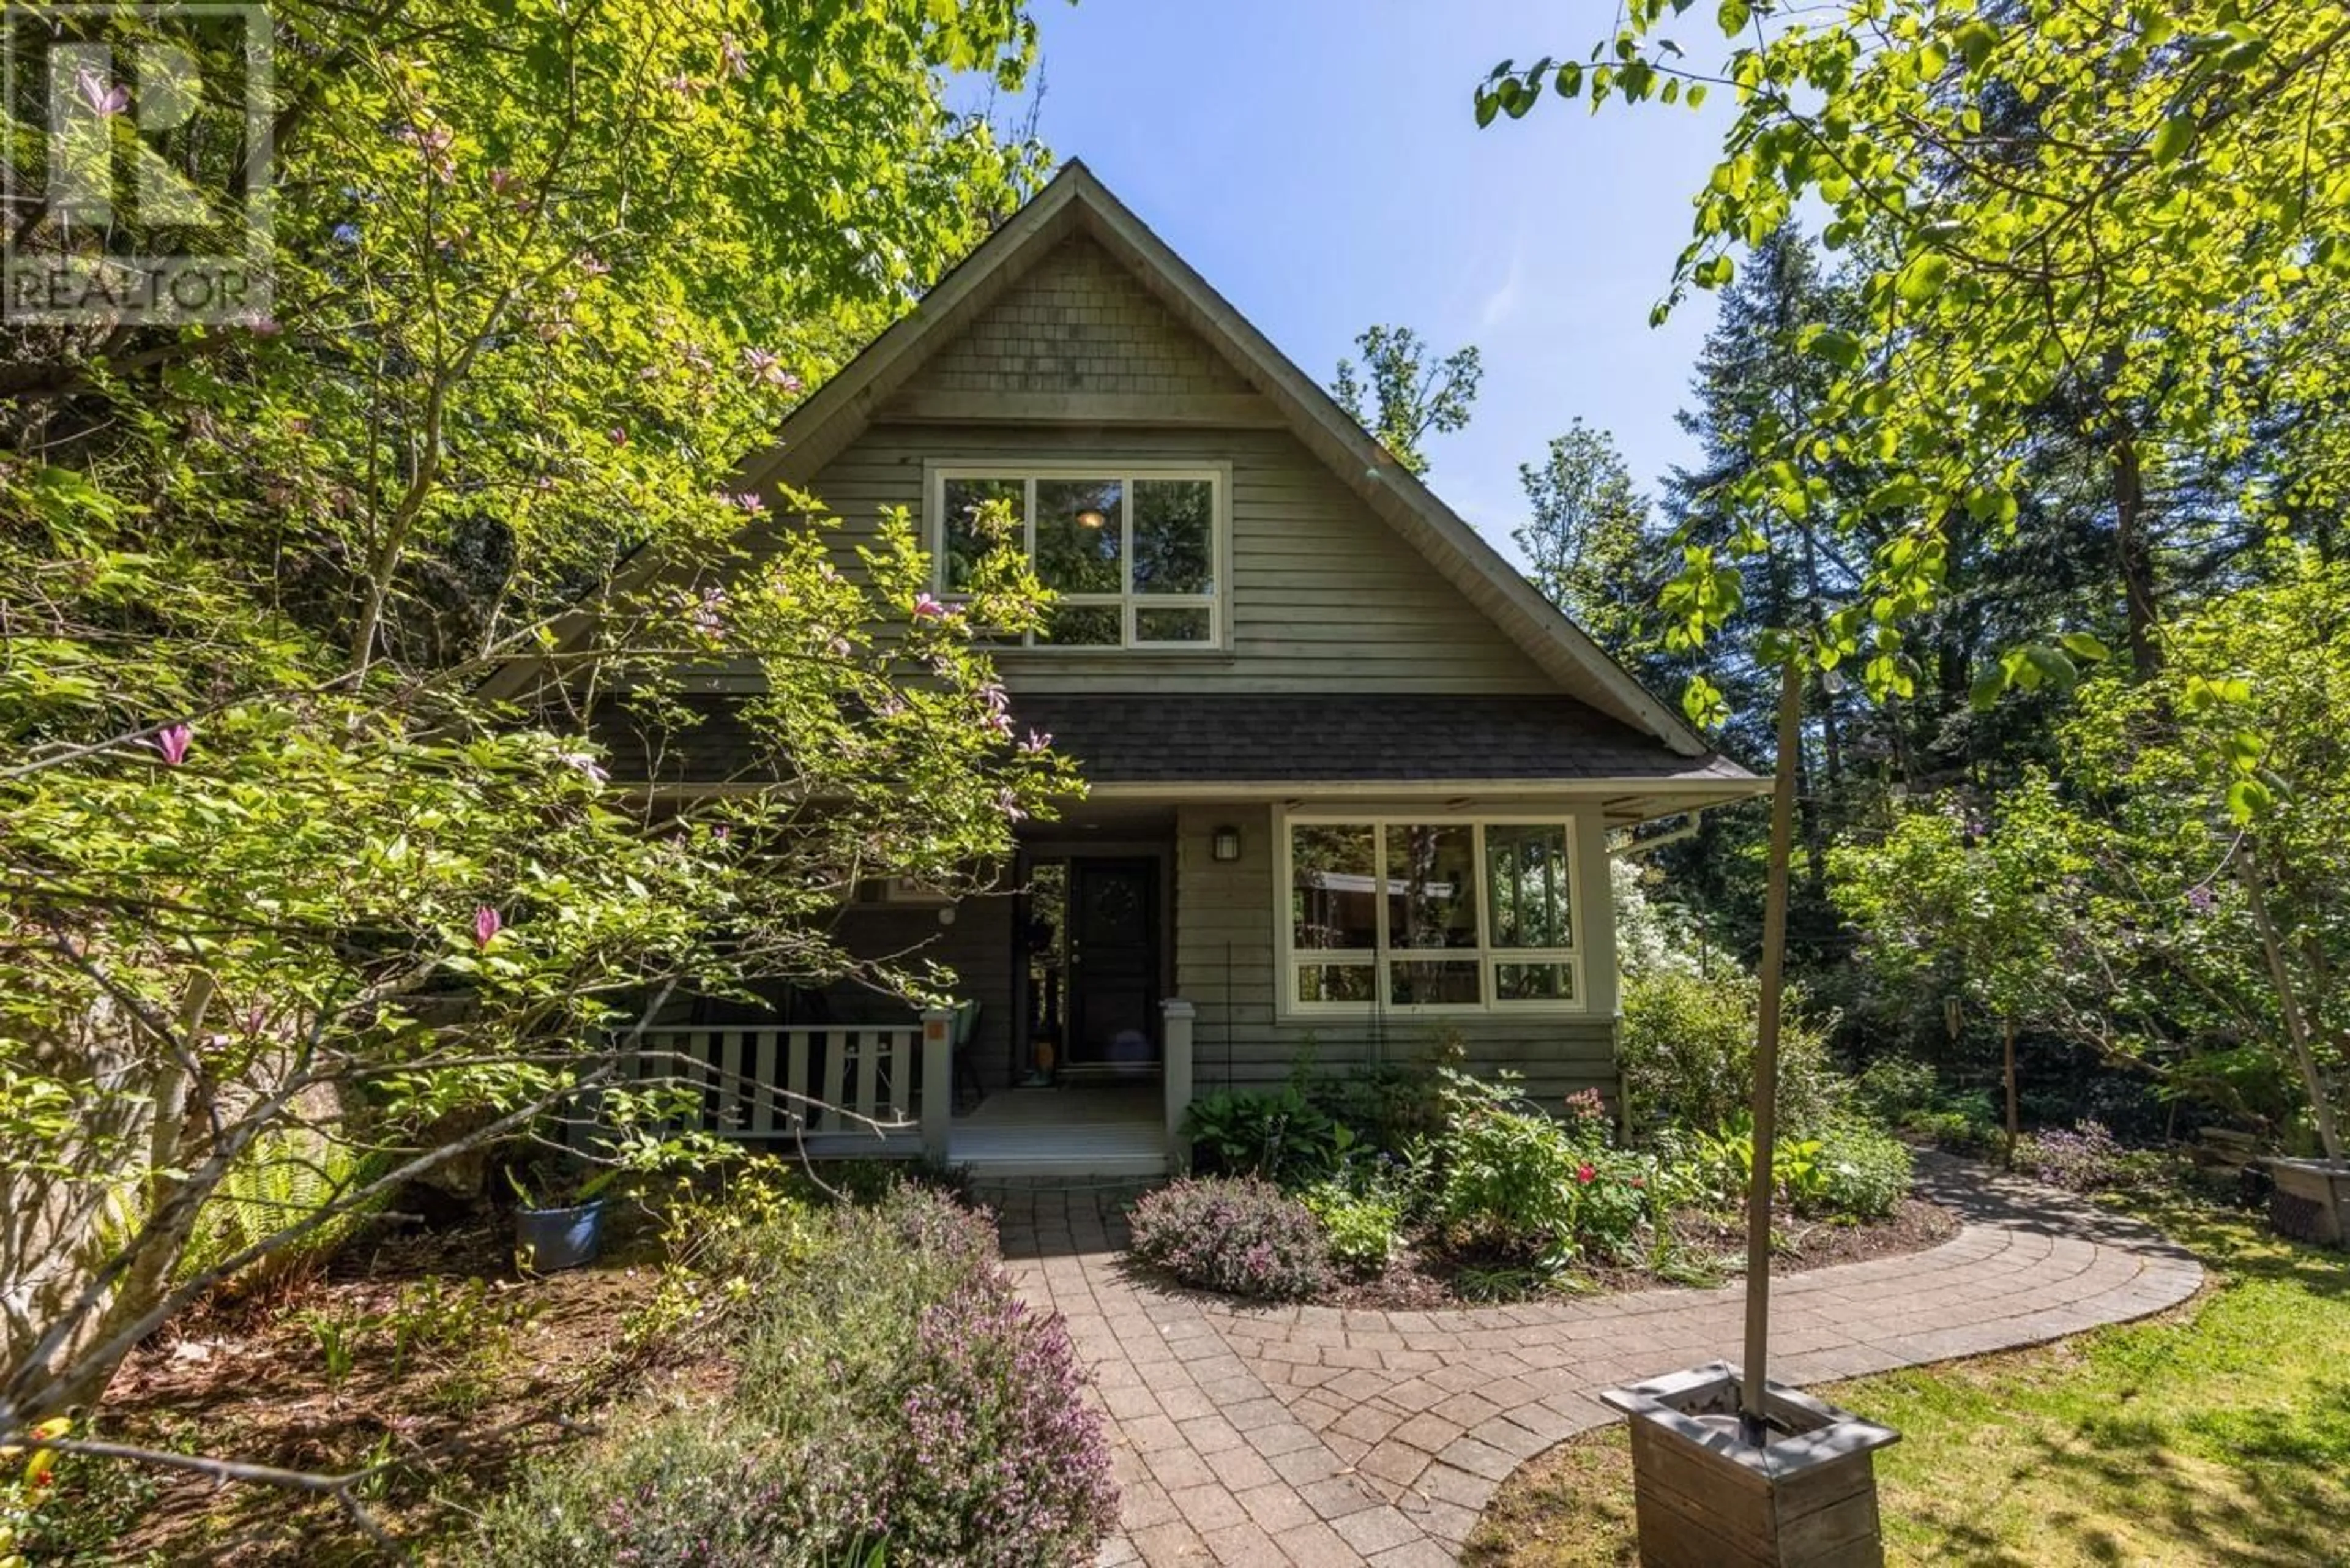 Cottage for 576 CATES HILL ROAD, Bowen Island British Columbia V0N1G2